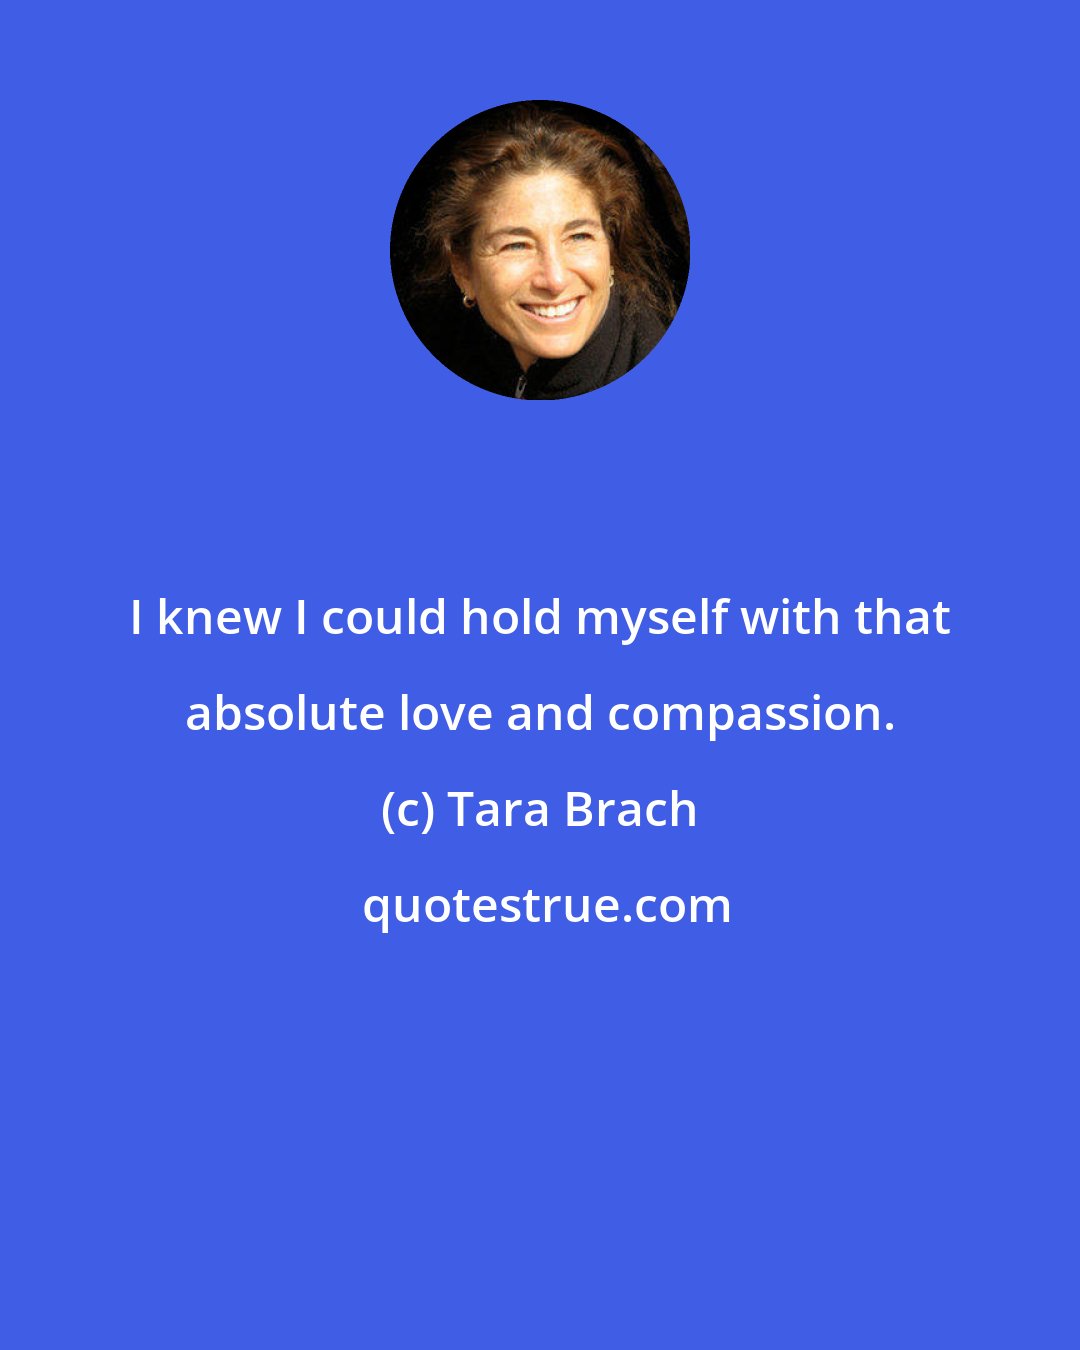 Tara Brach: I knew I could hold myself with that absolute love and compassion.